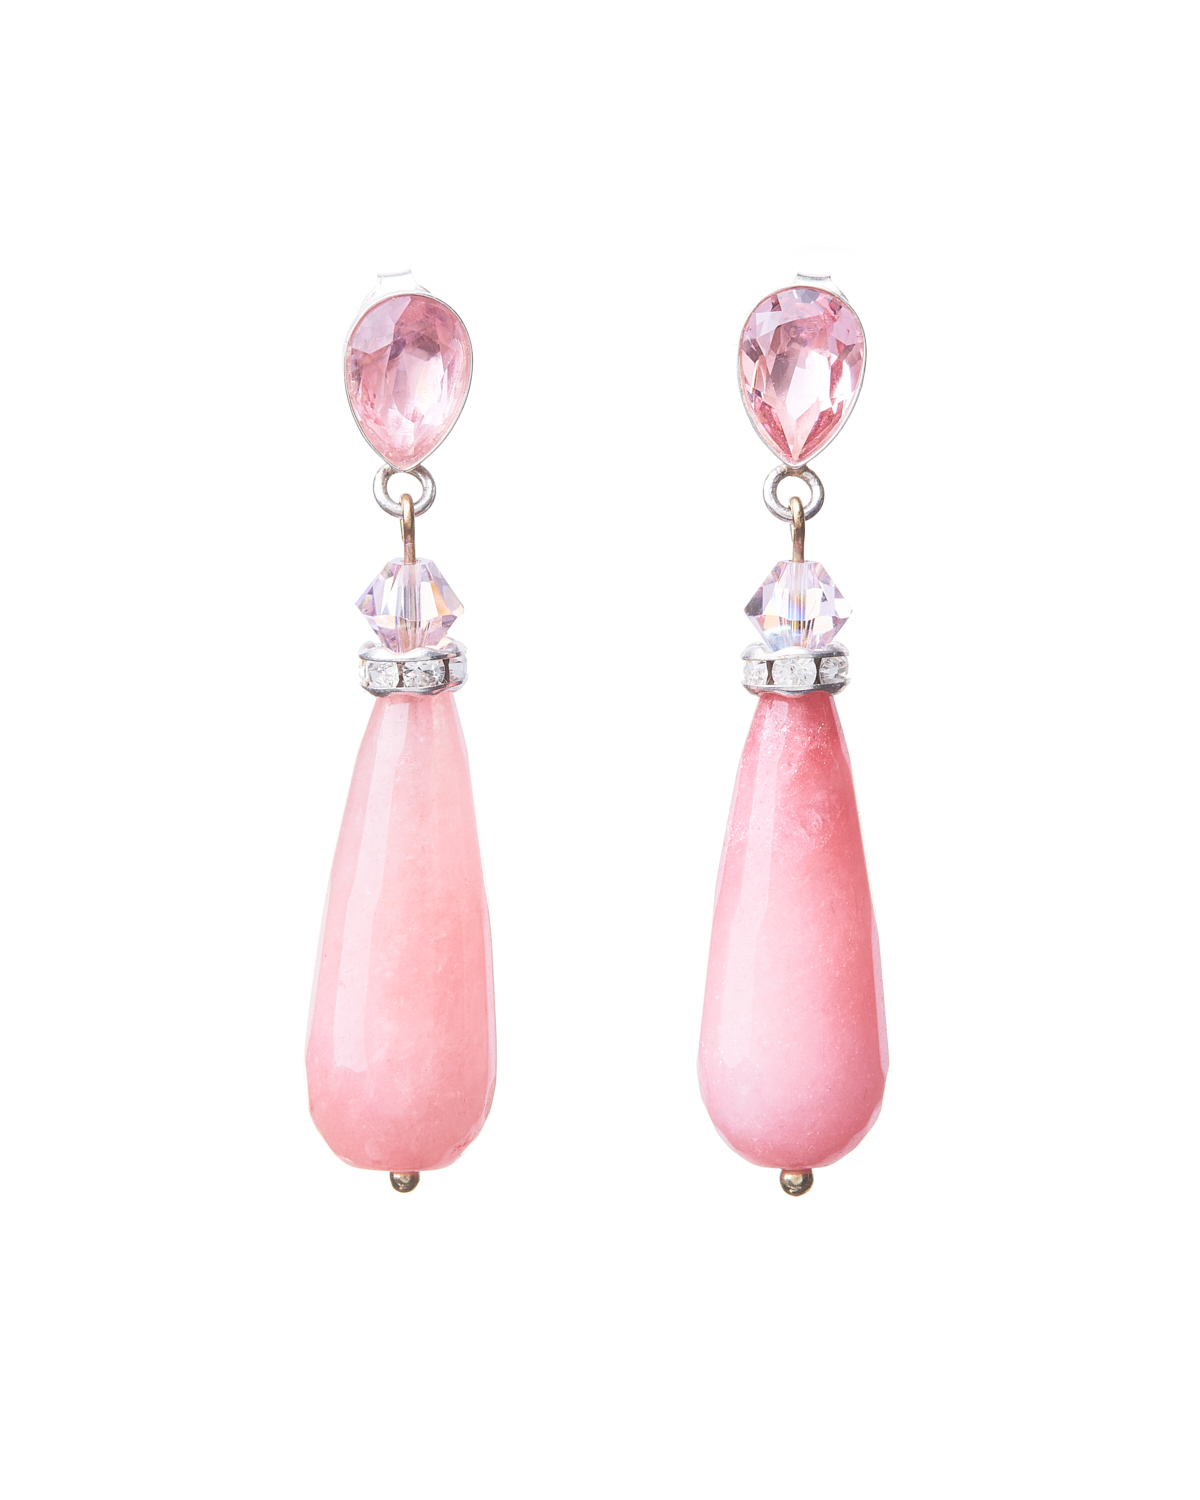 Rose Drop earrings with crystals